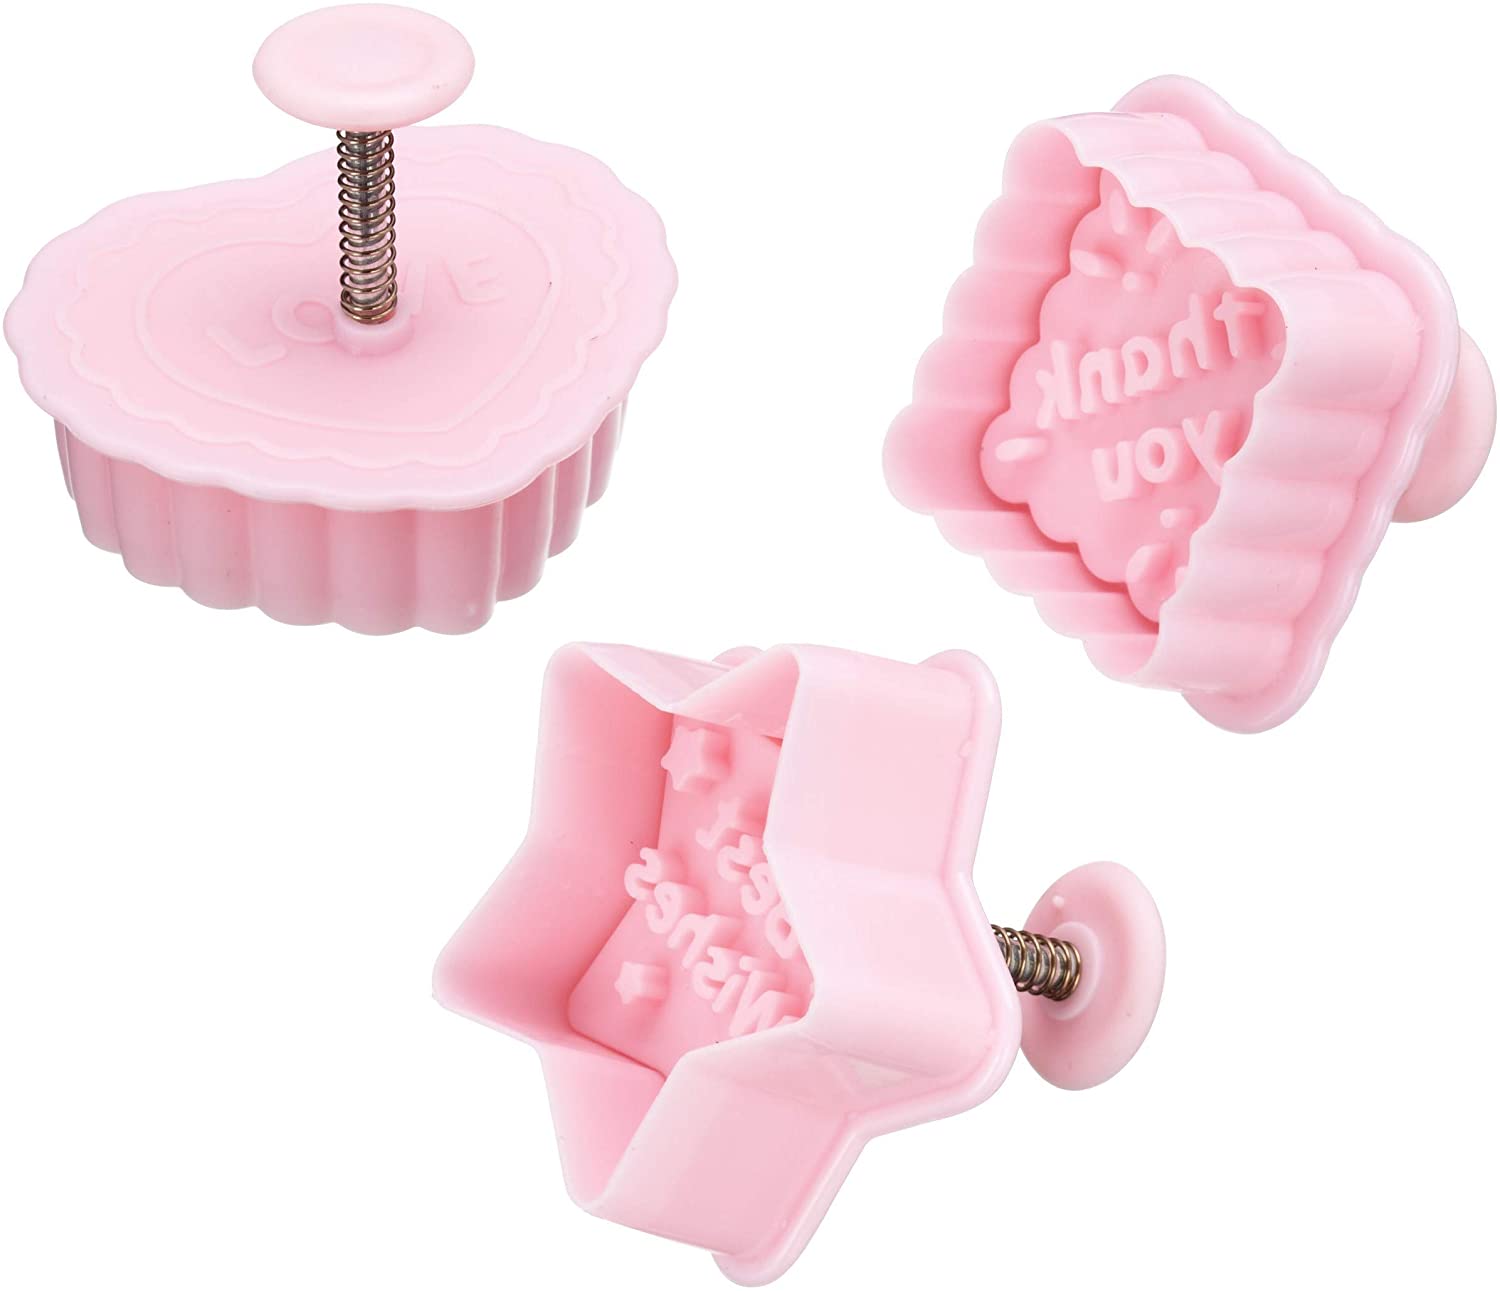 KitchenCraft Kitchen Craft Sweetly Does It Message Plunger Cutters